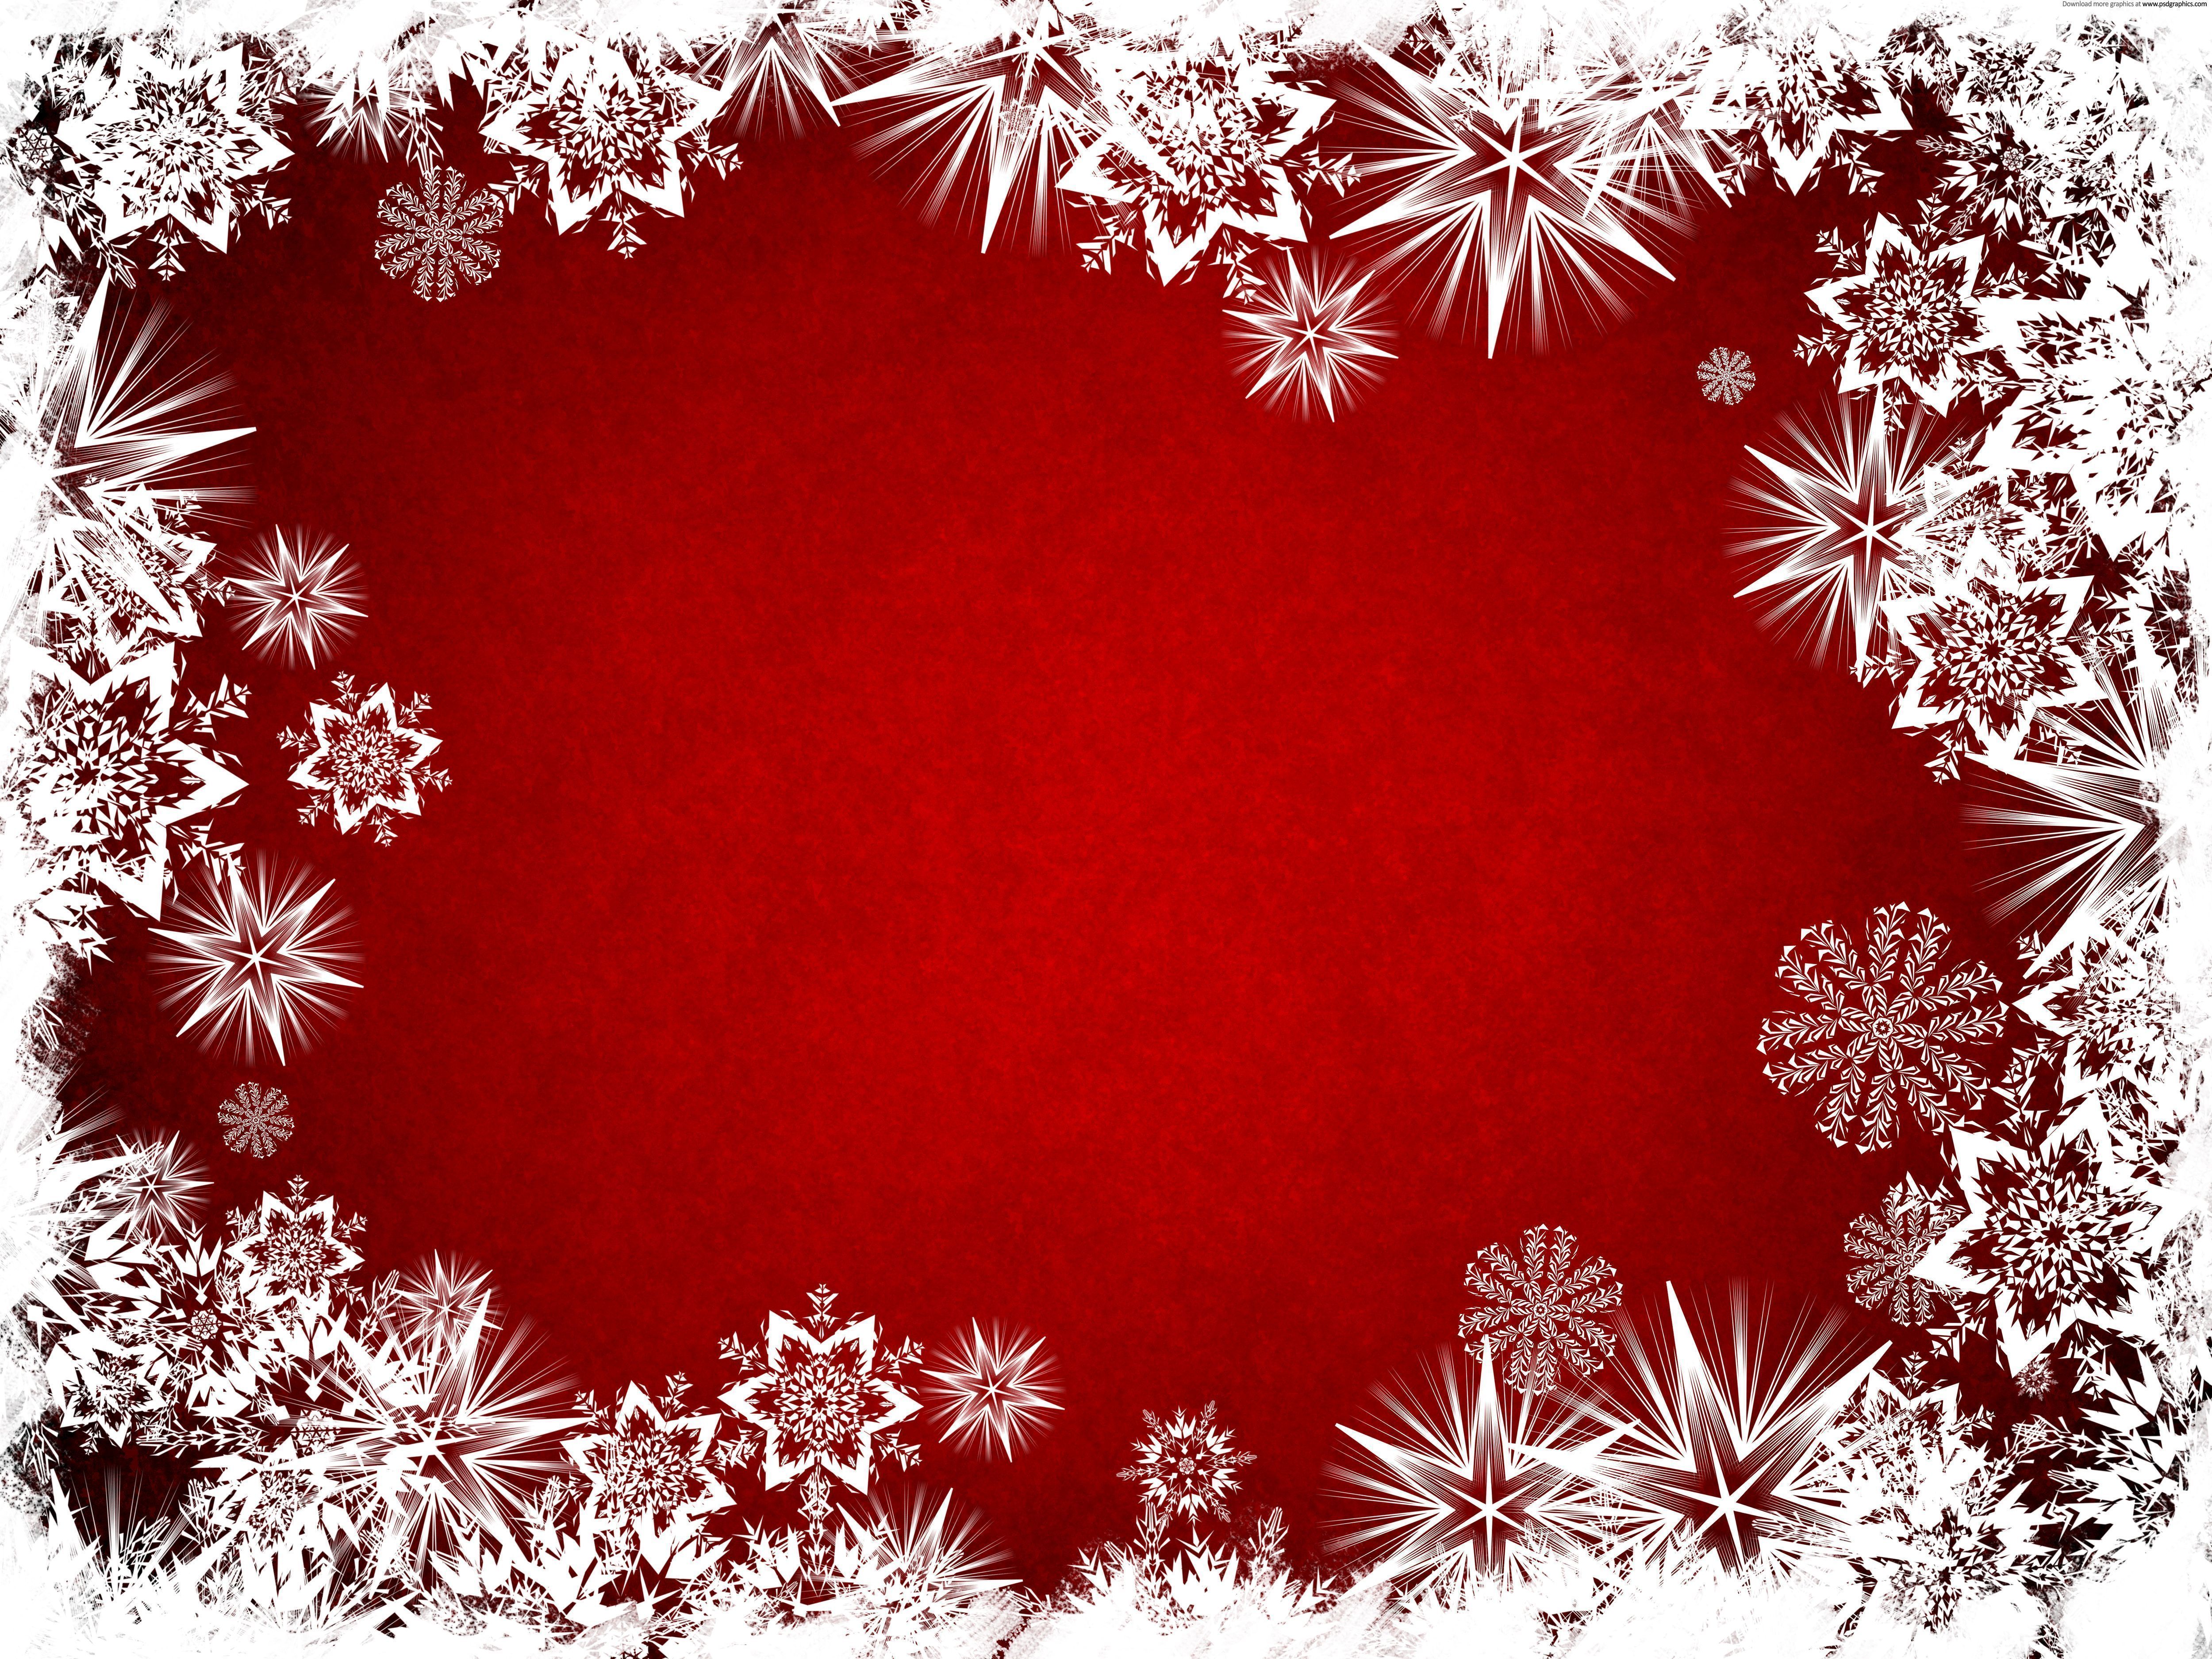 Christmas Backgrounds for Photoshop | Wallpapers9